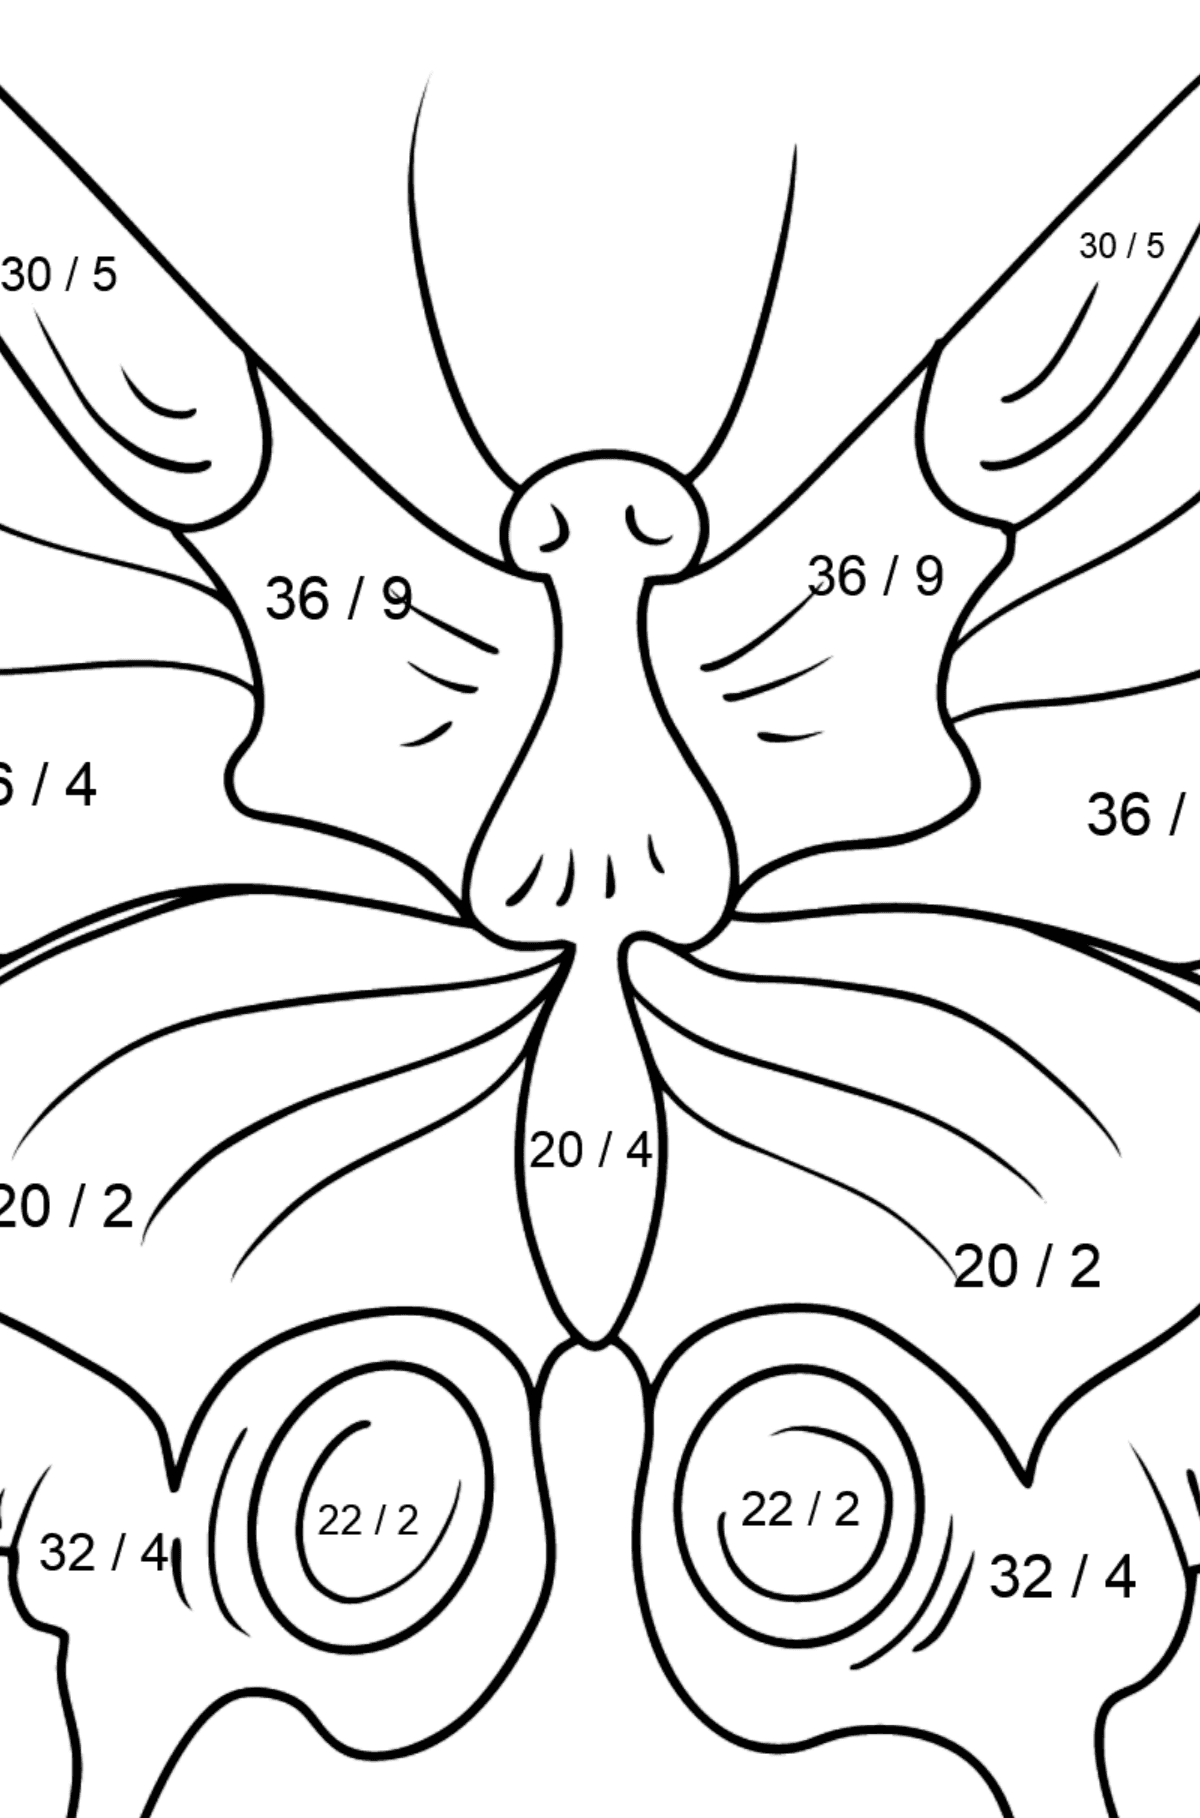 Swallowtail Butterfly coloring page - Math Coloring - Division for Kids